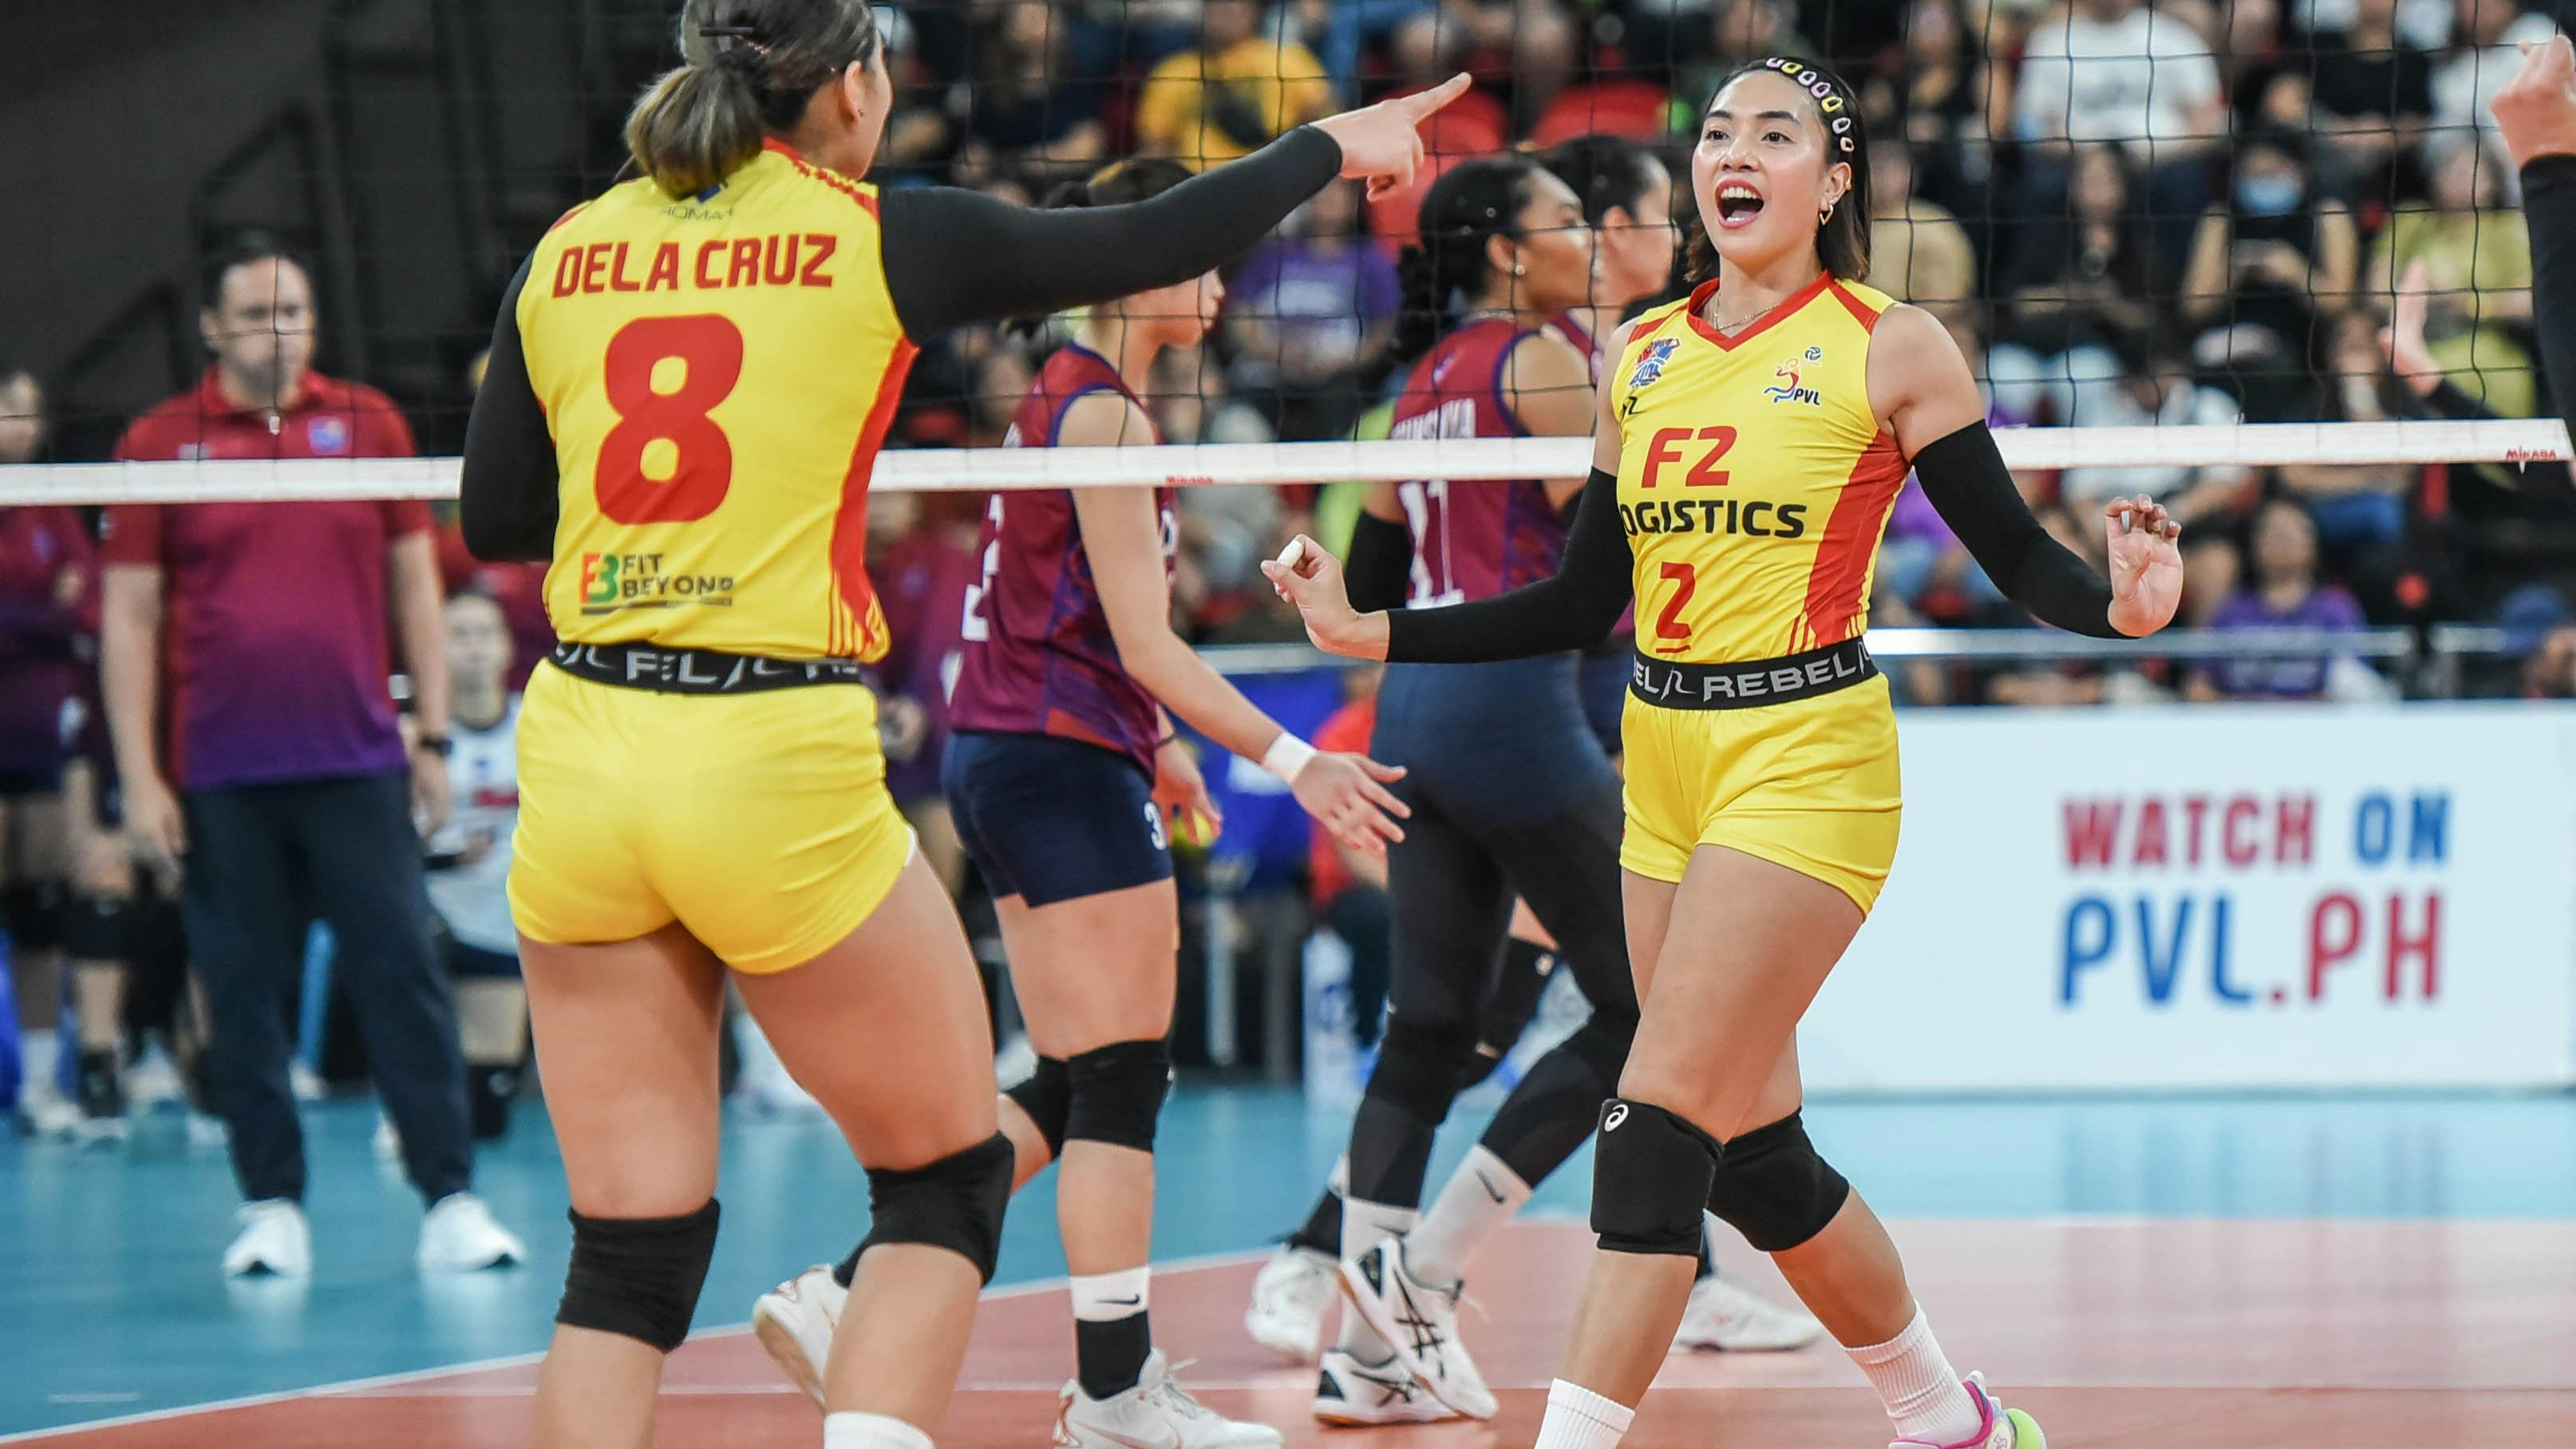 Aby Maraño issues strong reminder after F2 Logistics